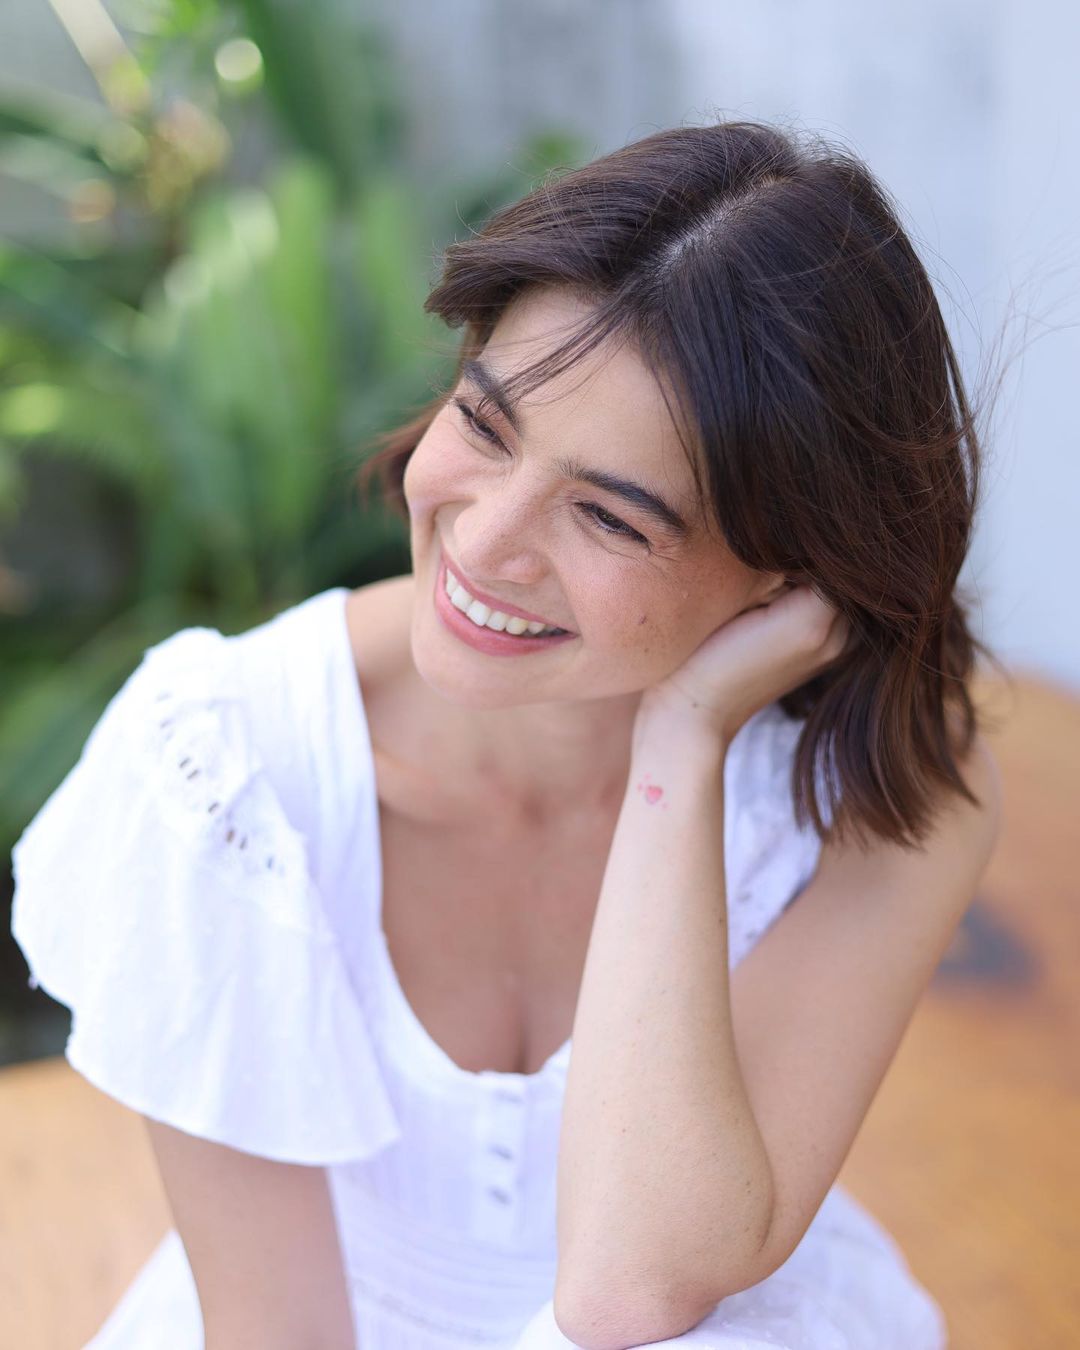 Look: Anne Curtis' All-white Casual Ootd